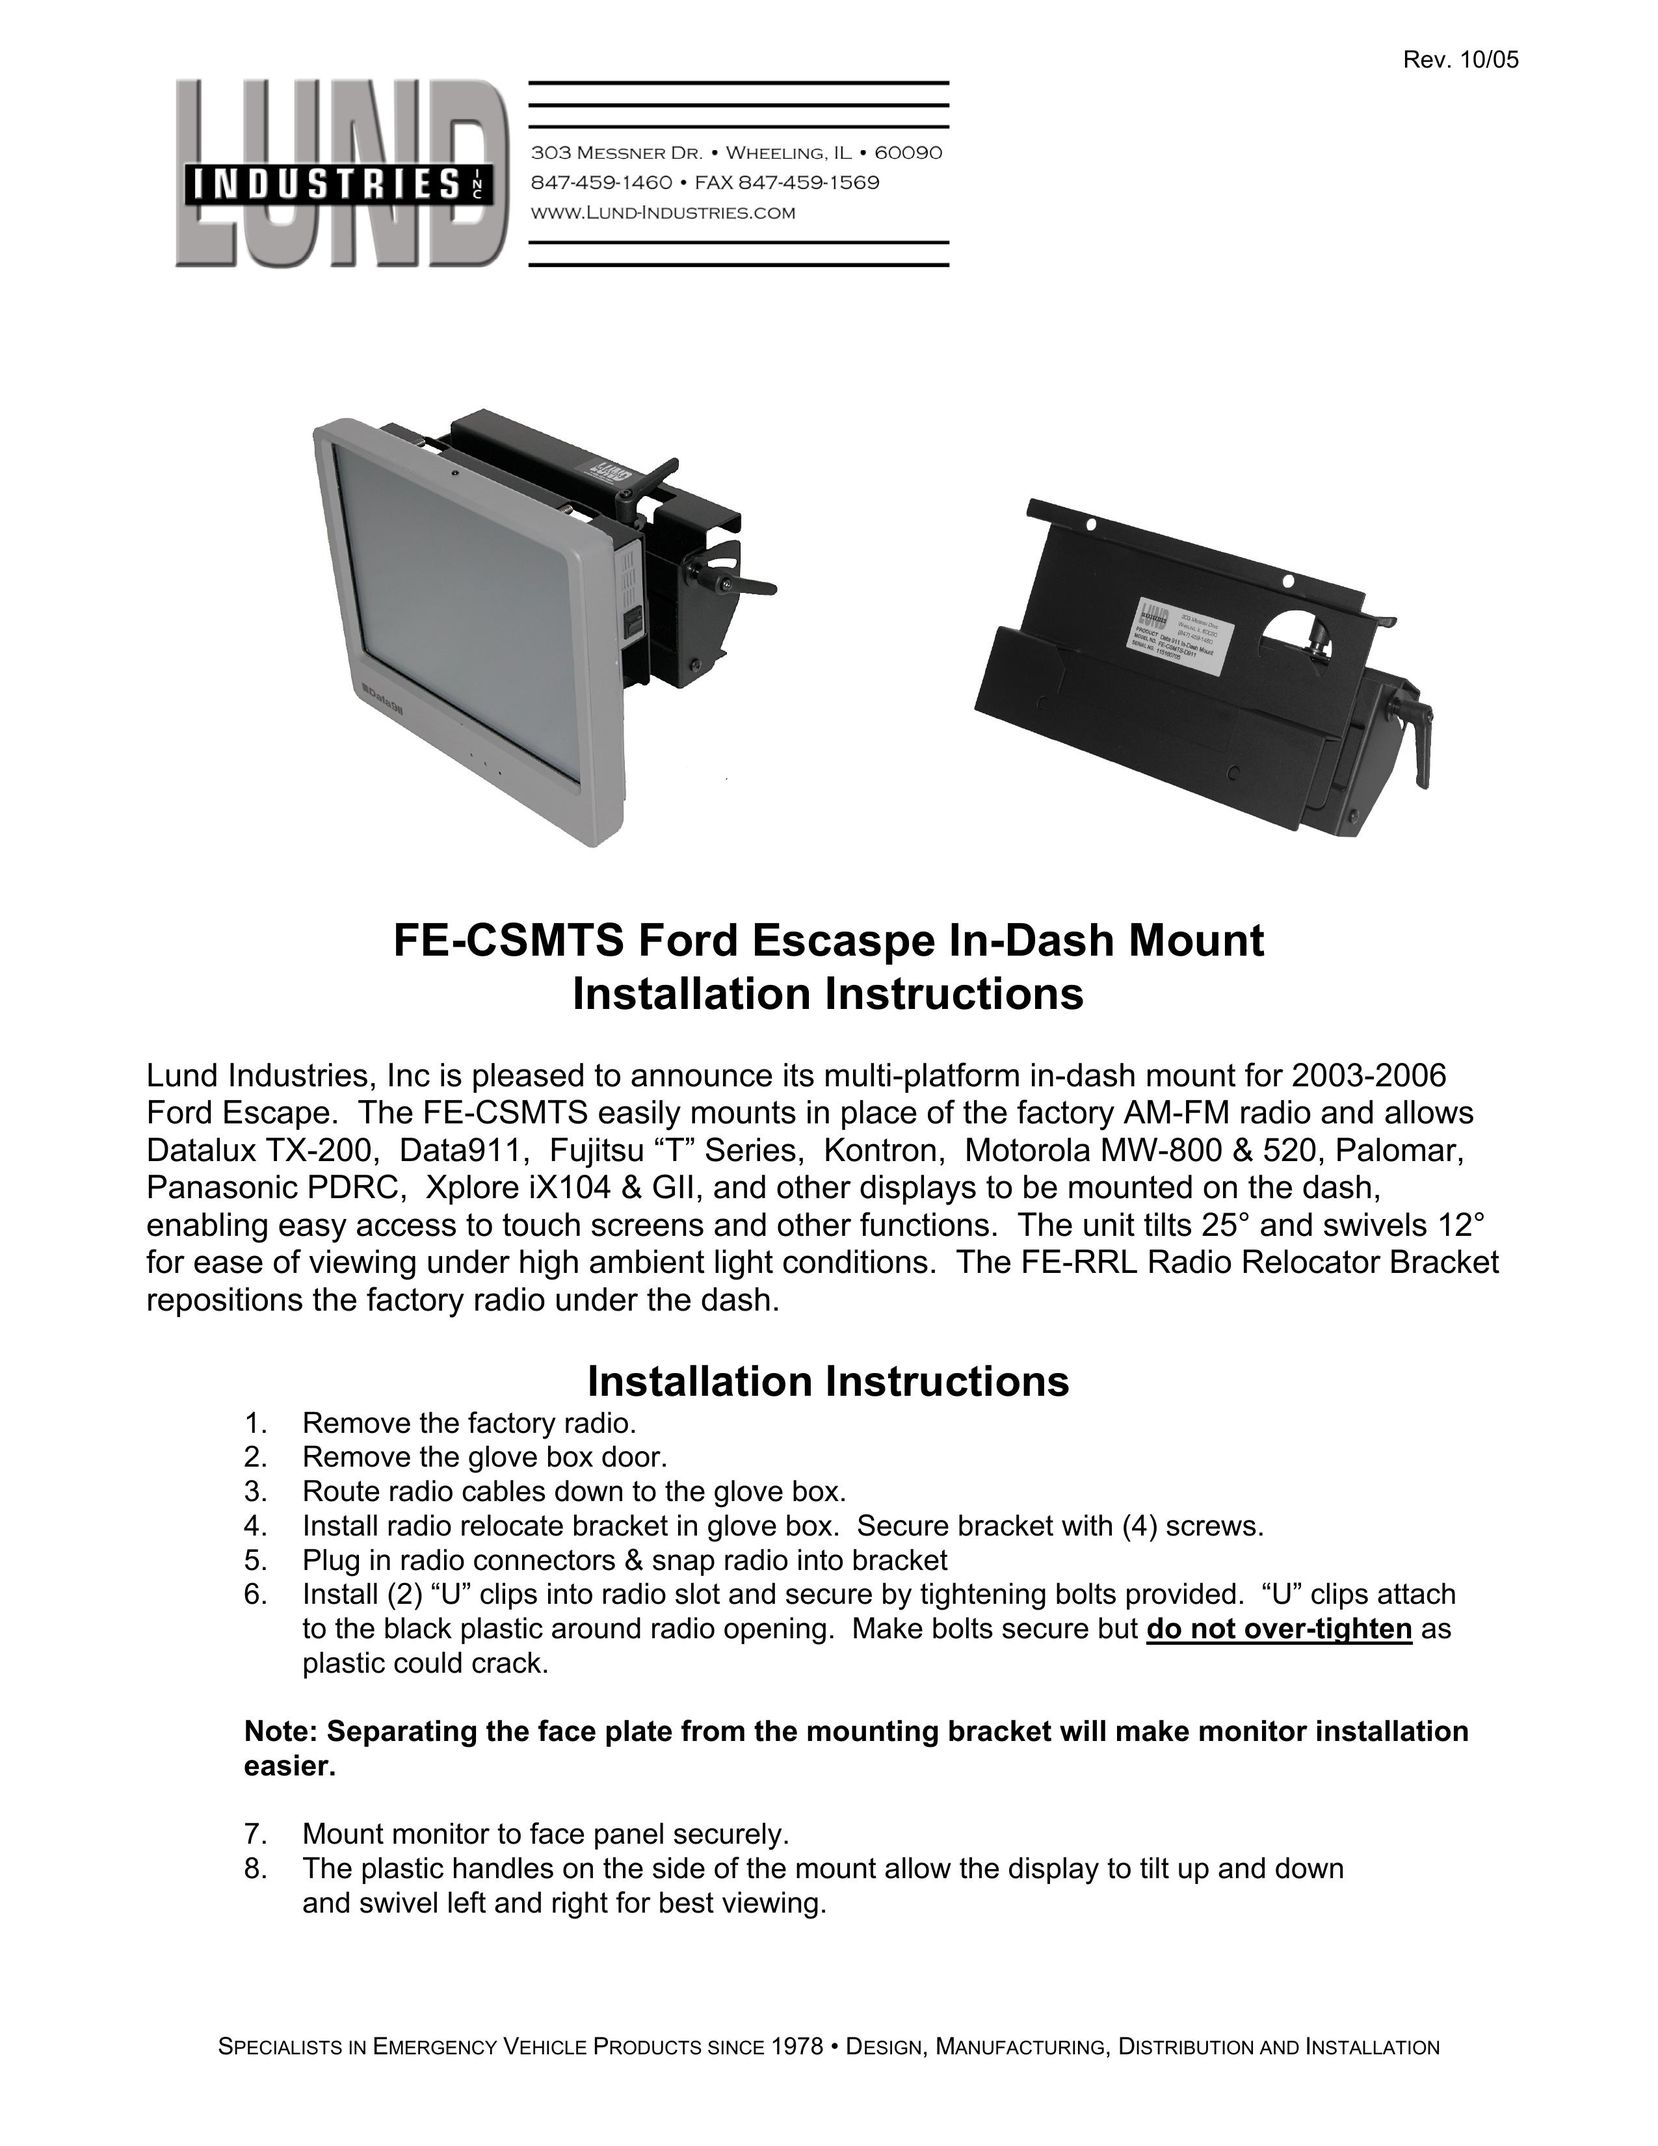 Lund Industries FE-CSMTS Computer Monitor User Manual